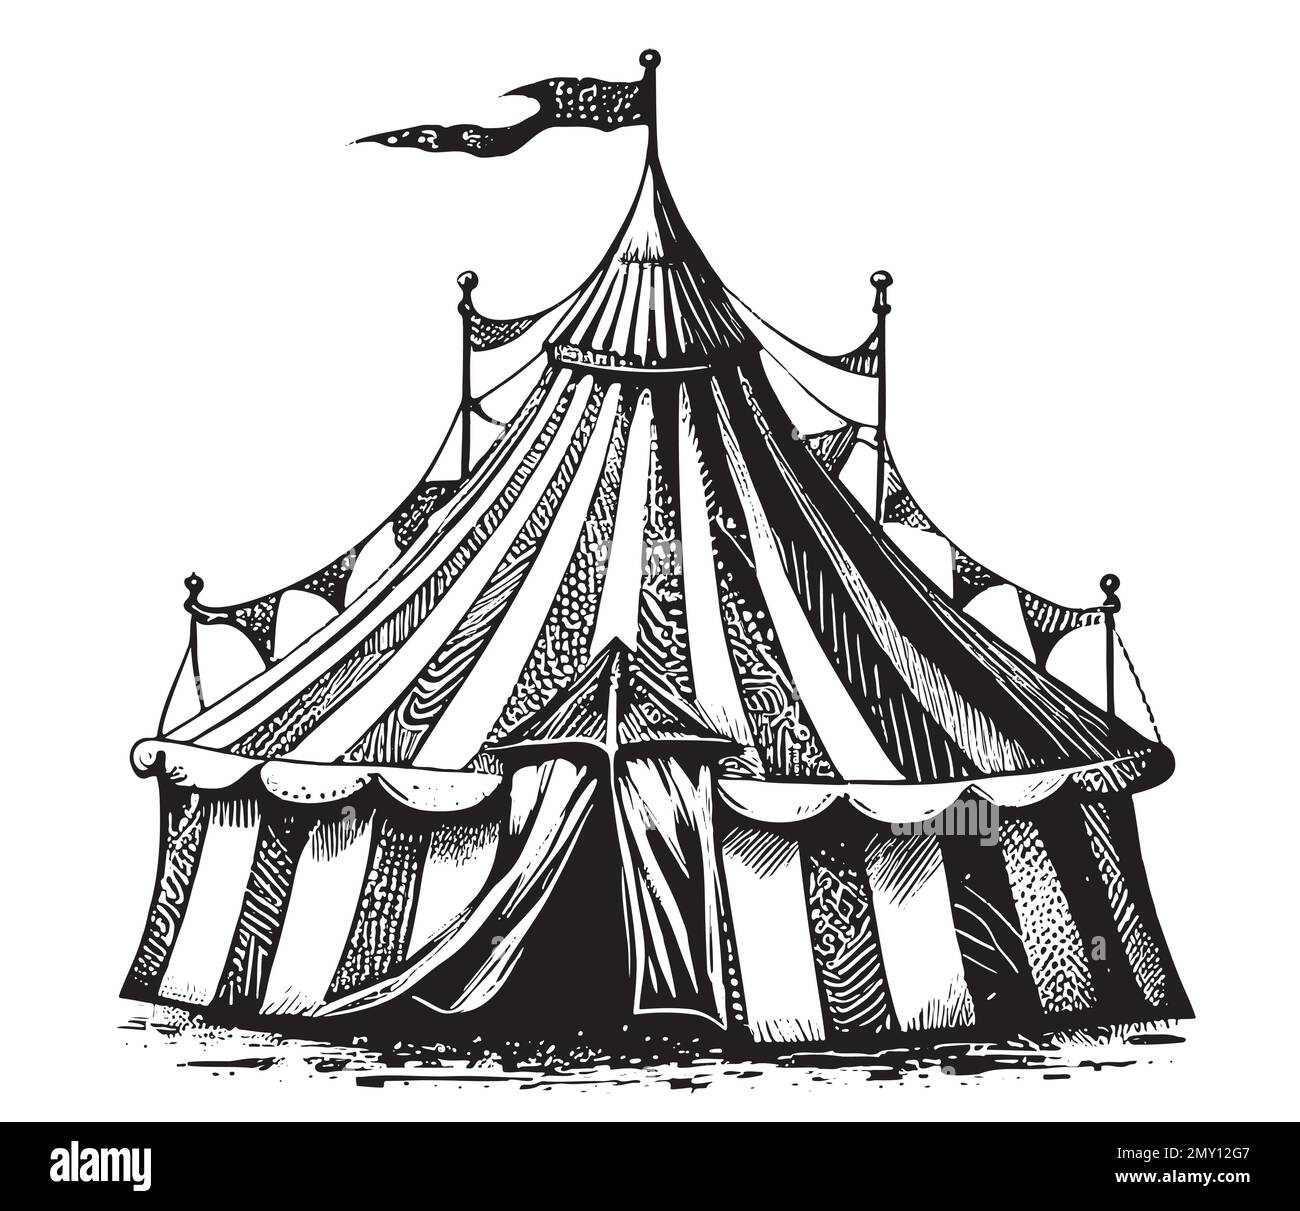 vintage circus clip art black and white